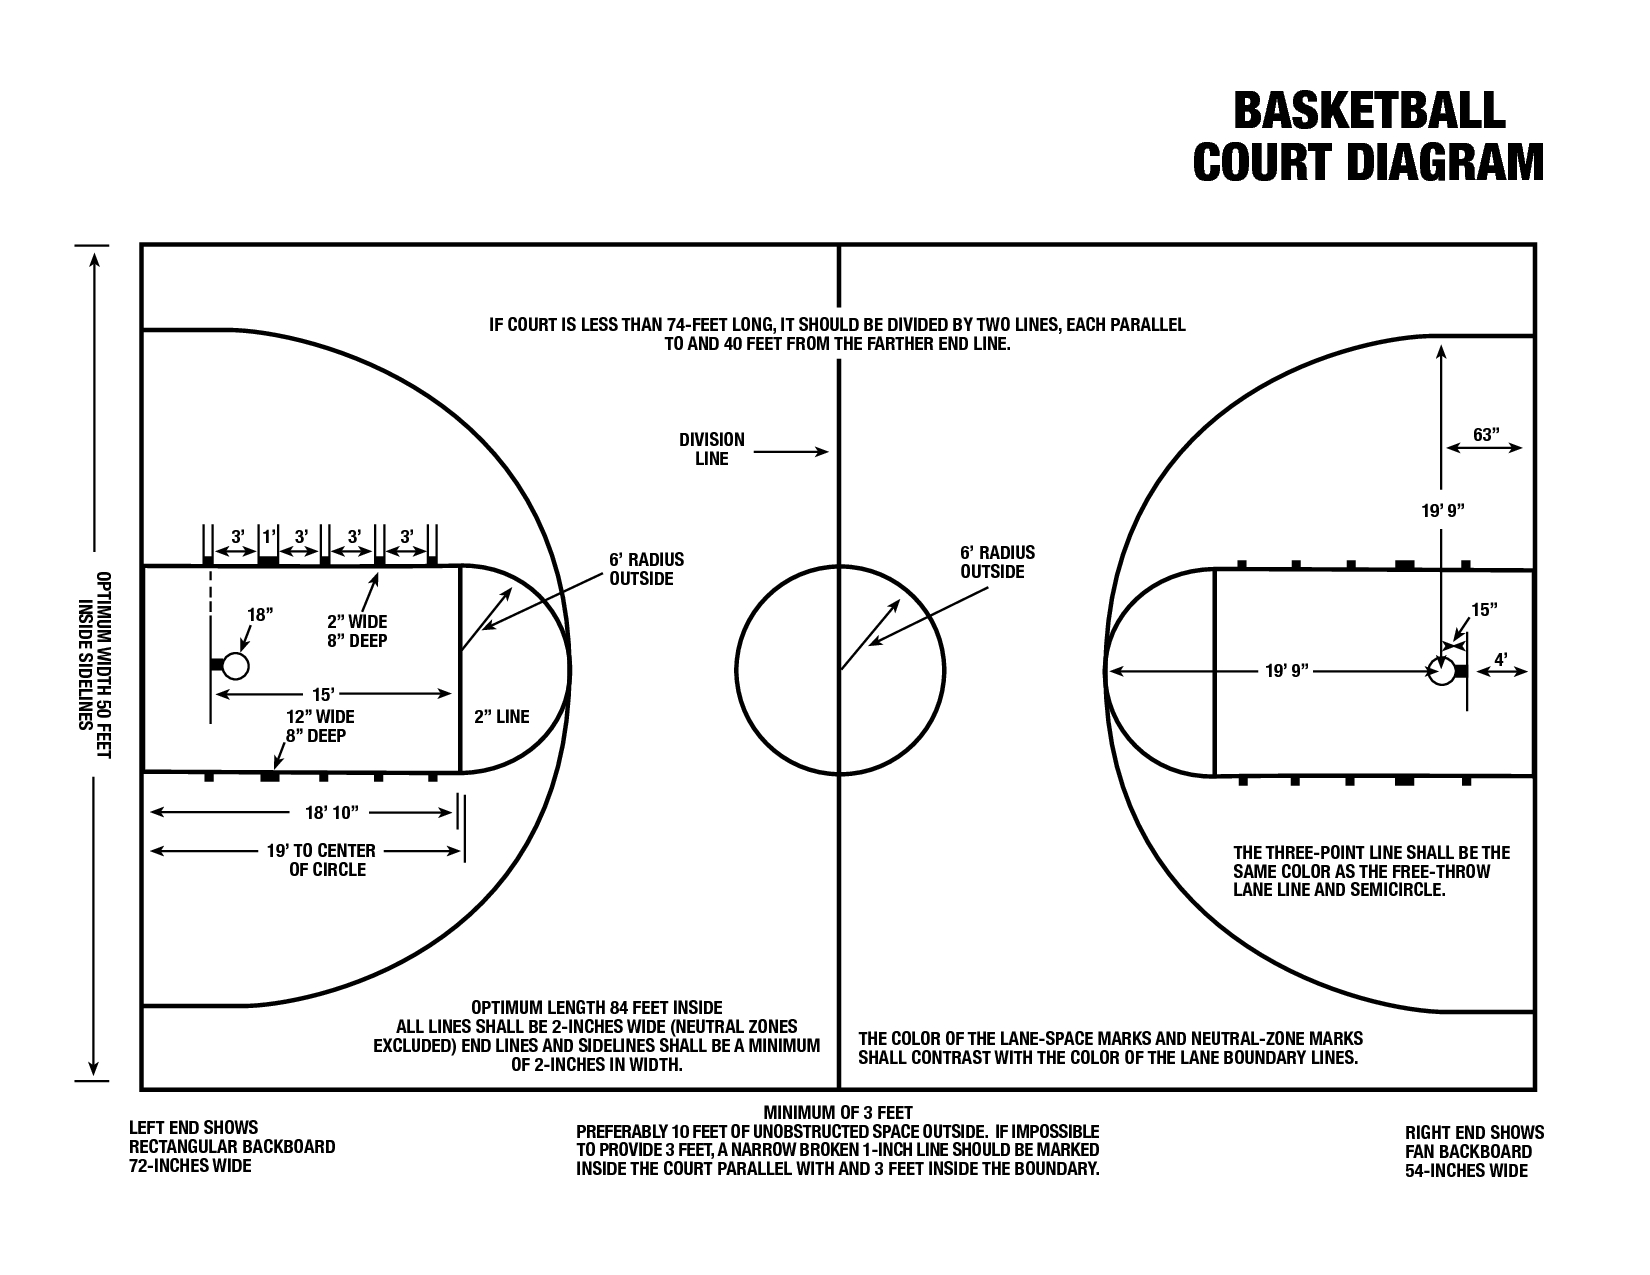 Basketball Half Court Diagram What To Buy To Make Your Own Basketball Court With Stencils Layouts